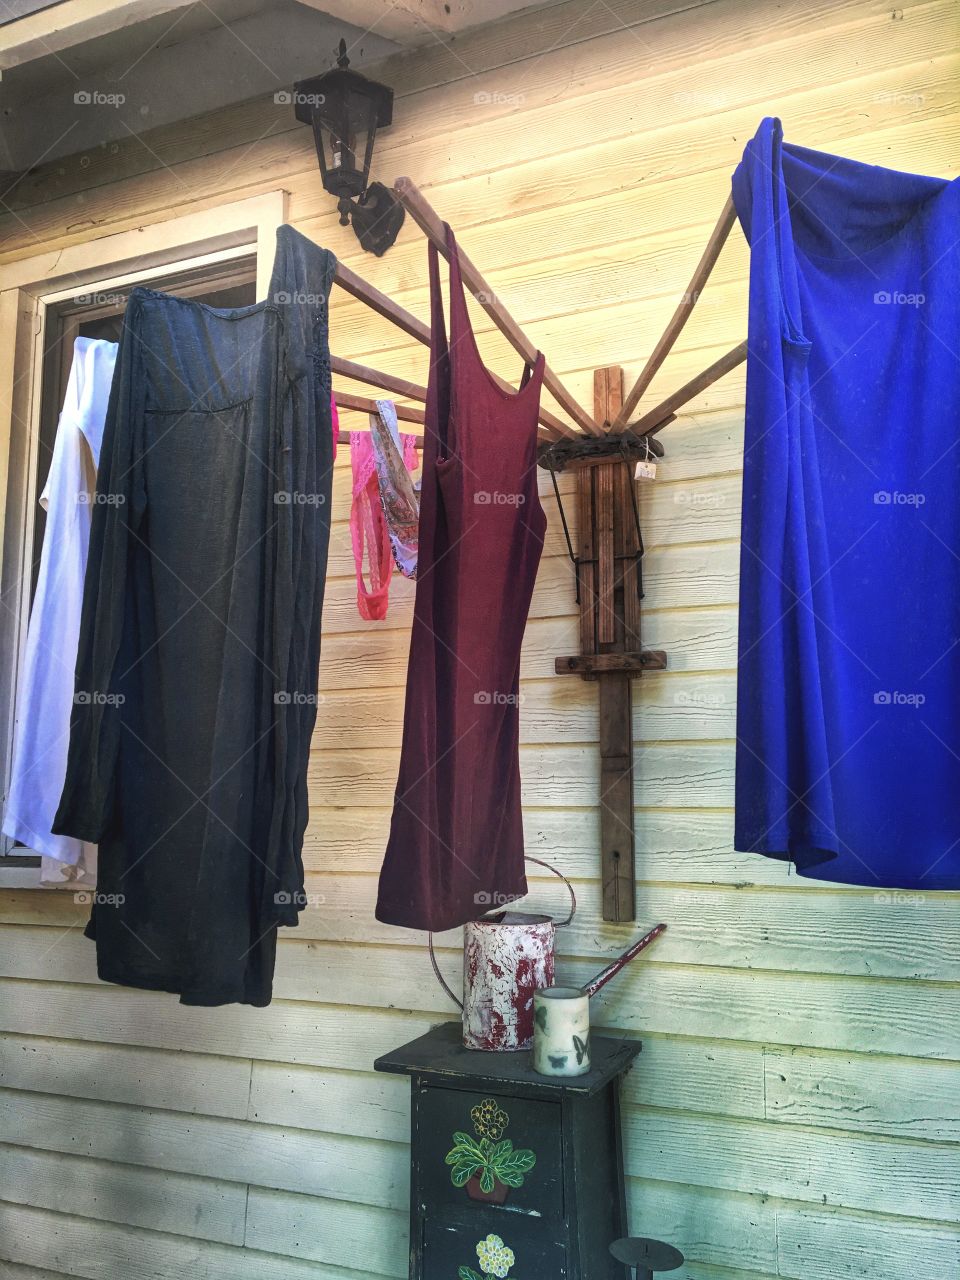 Close-up of clothes hanging for dry